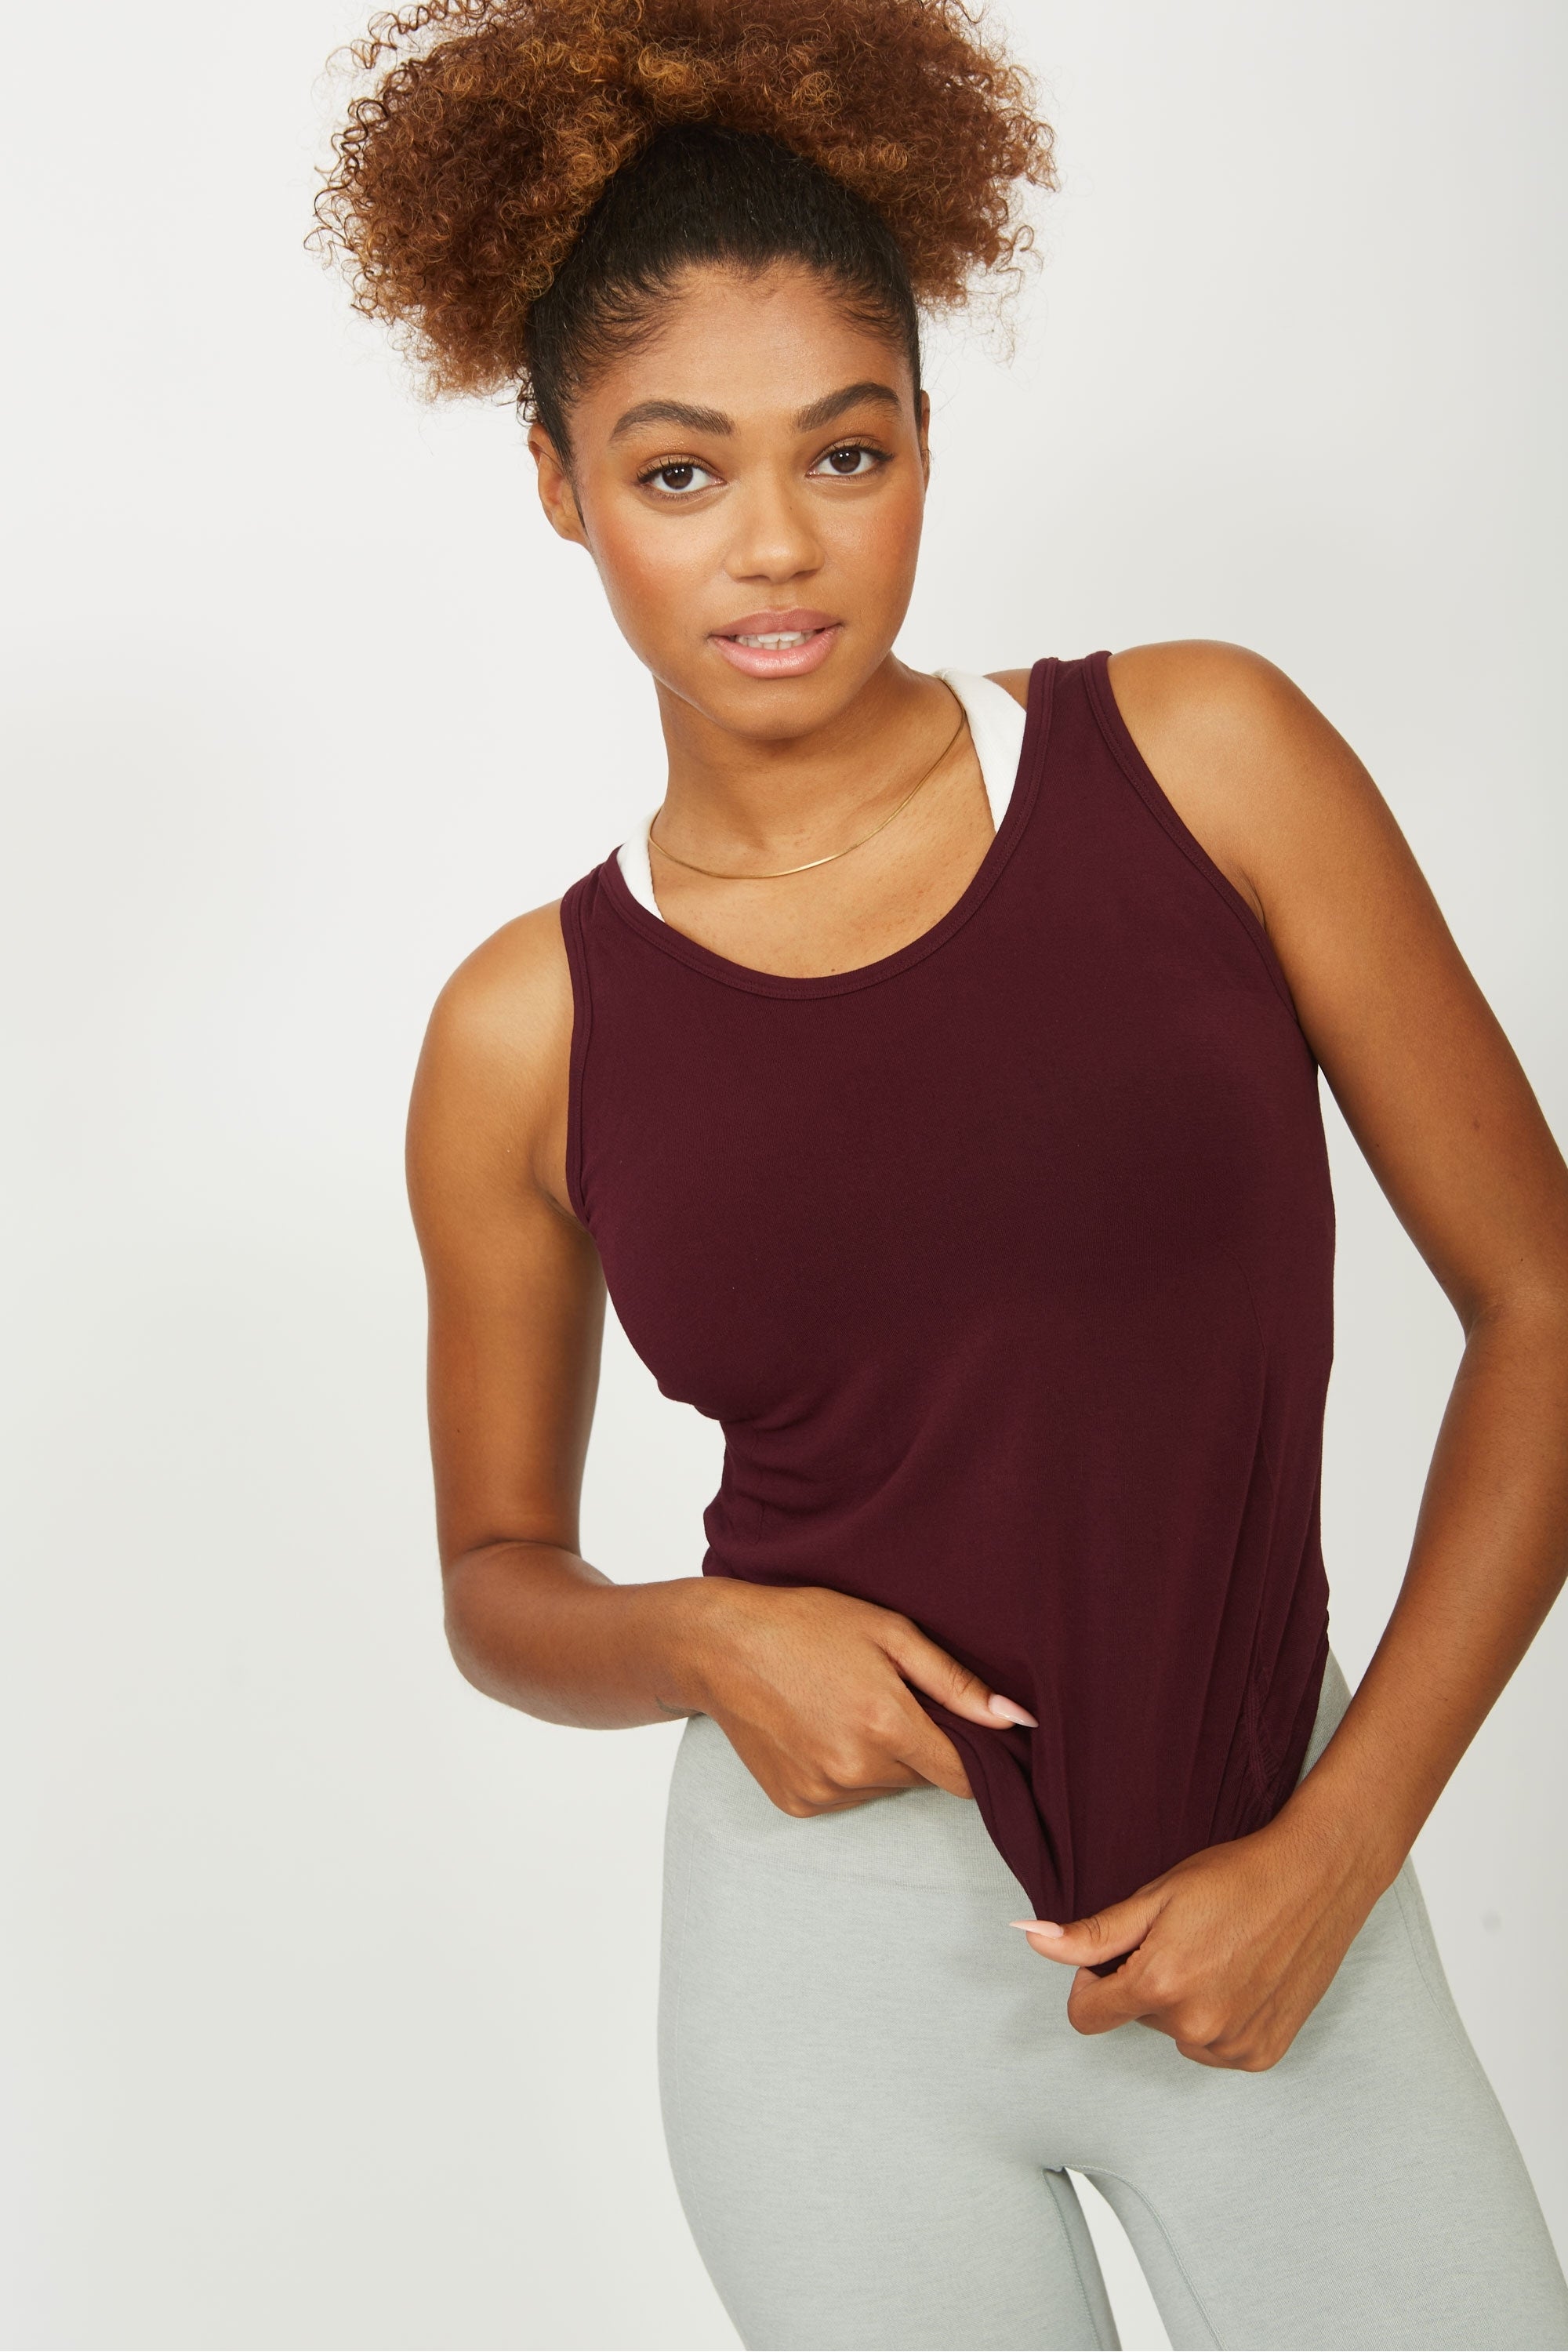 Model wearing cherry red sports tank top for sustainable activewear brand, Jilla.